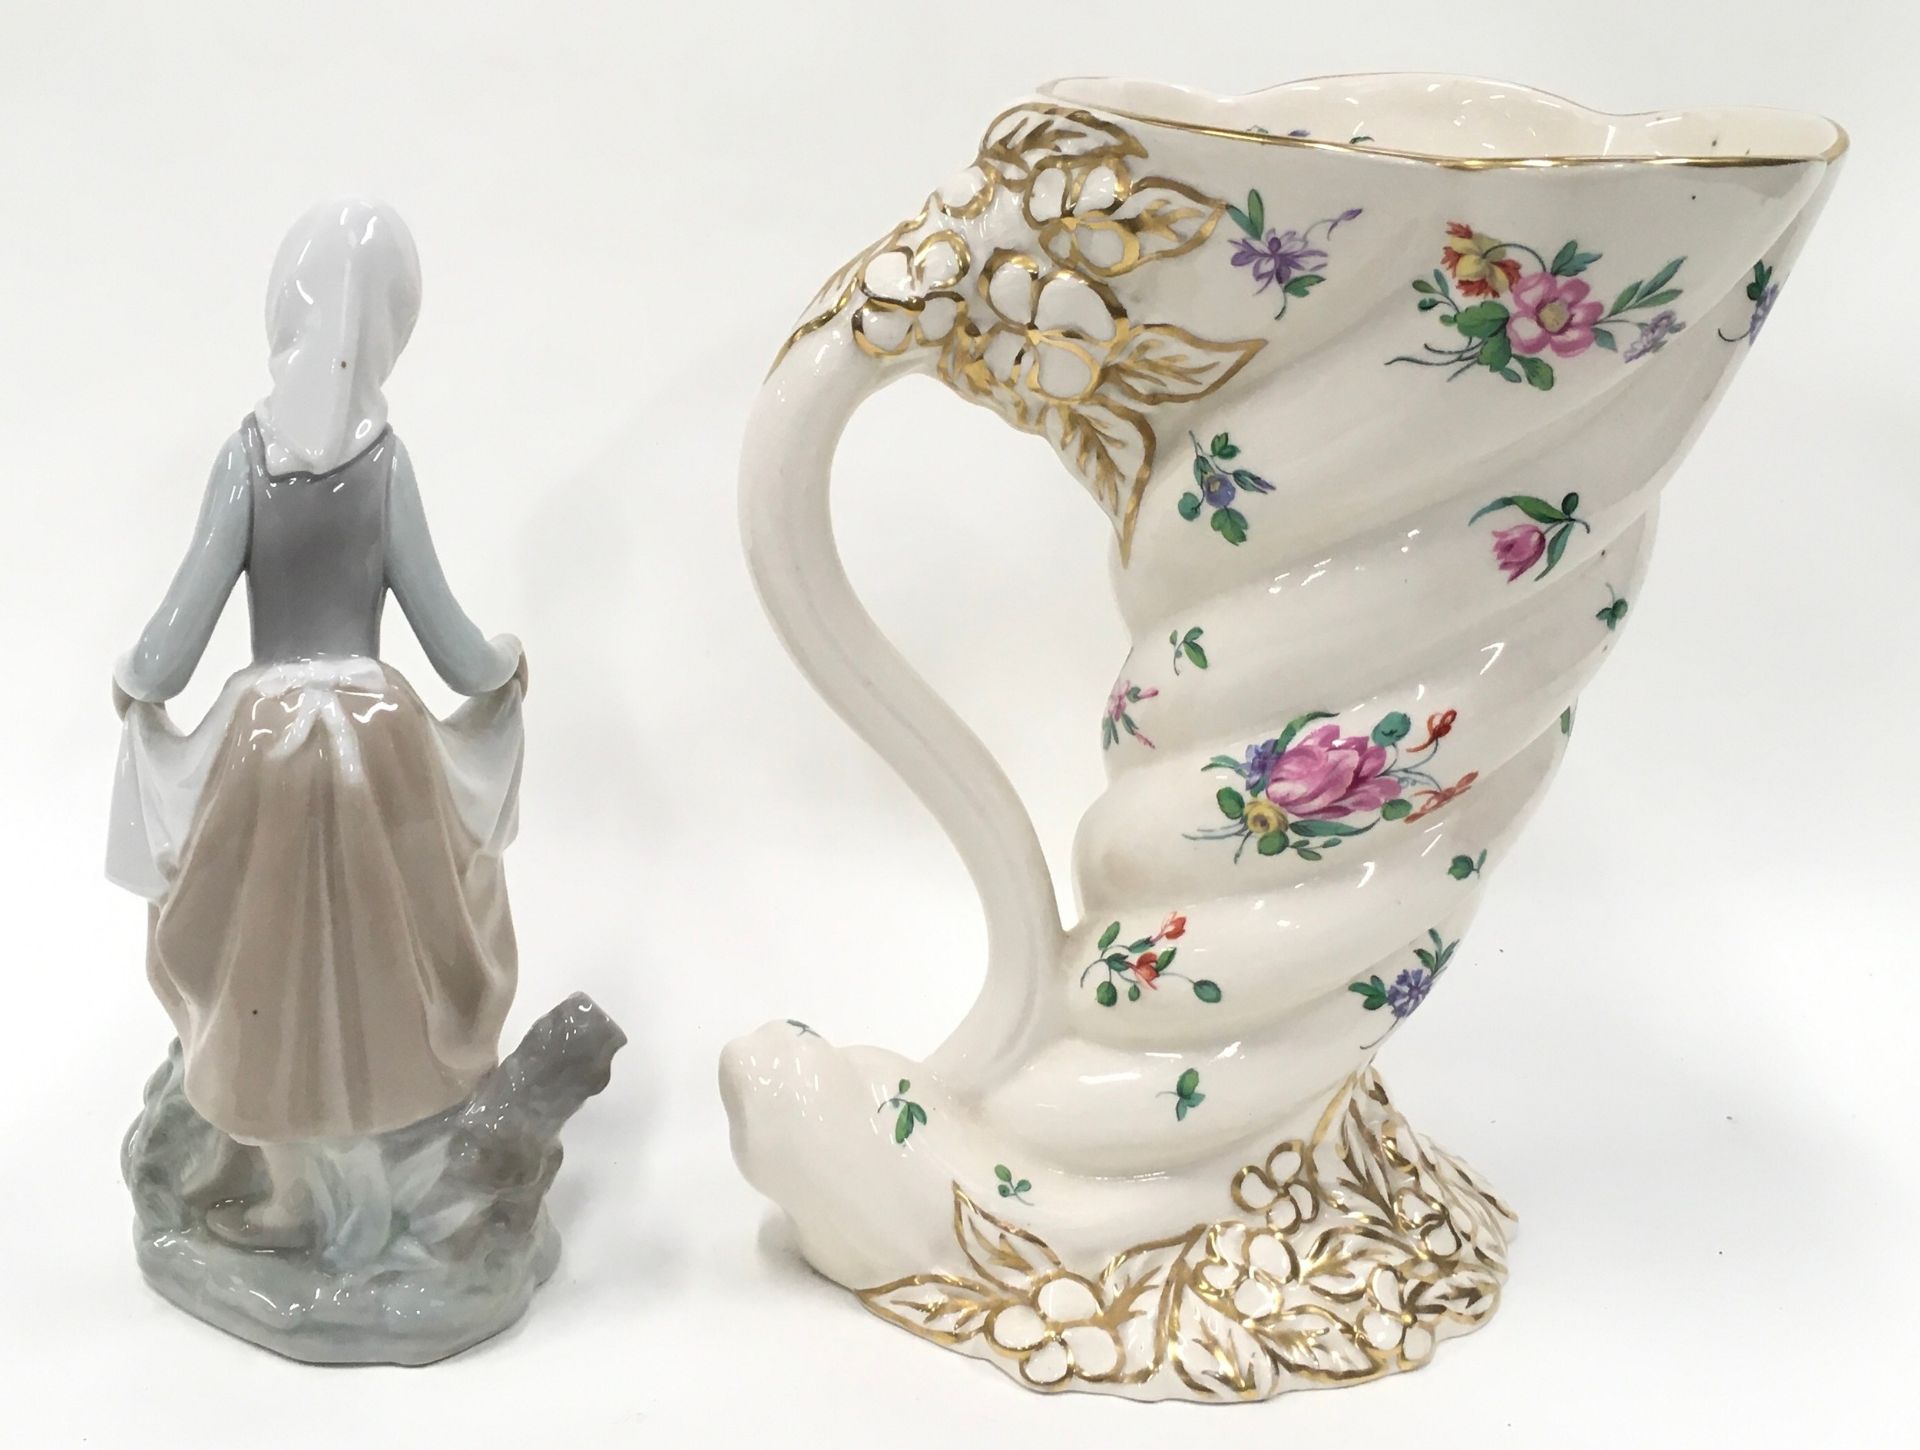 Clarice Cliff floral cornucopia vase 25.5cm tall together with a Lladro figurine. - Image 3 of 5